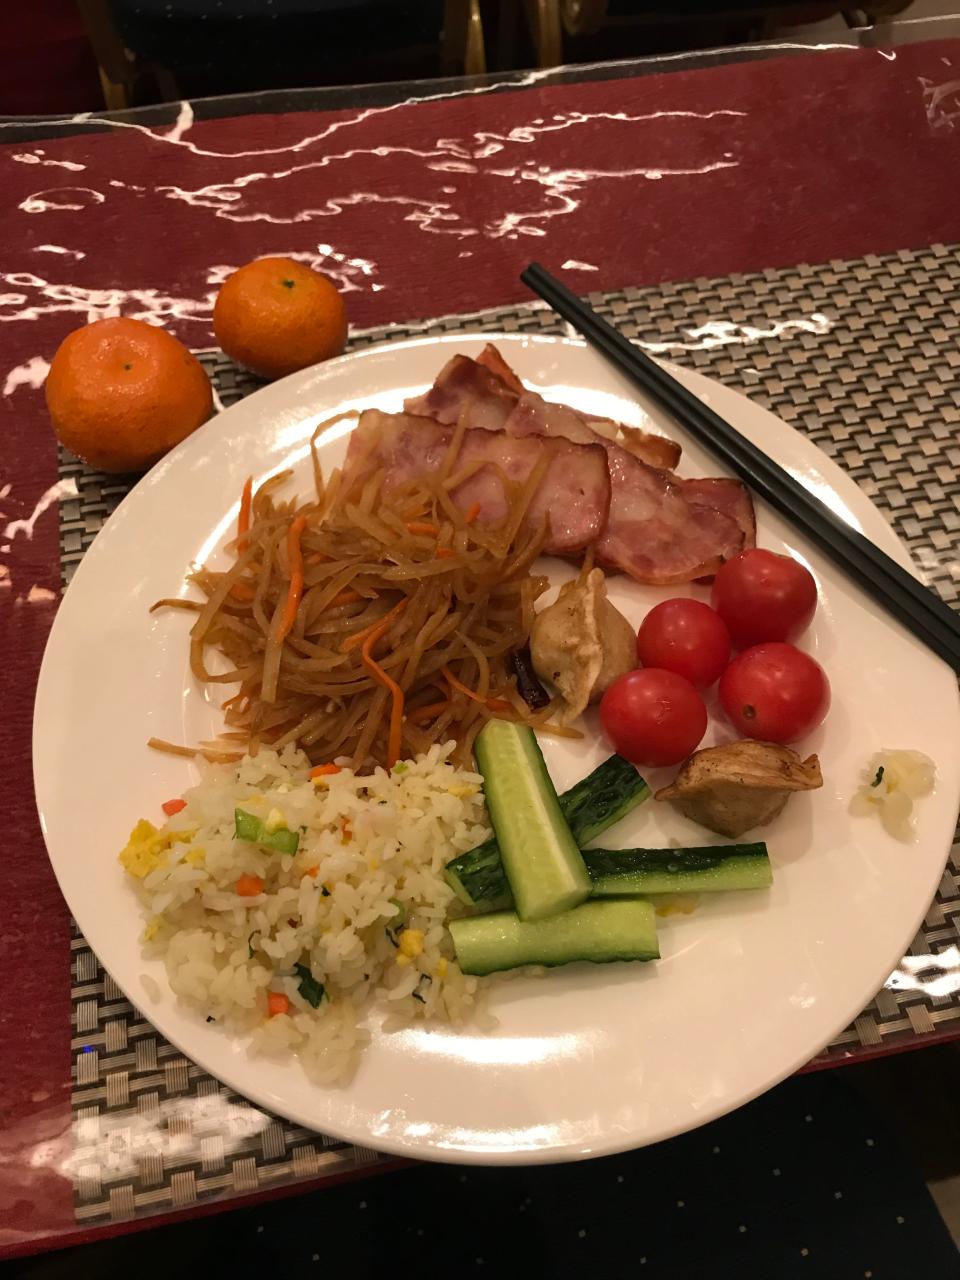 A recent breakfast for Journal Sentinel reporter Lori Nickel during the Winter Olympics in China.